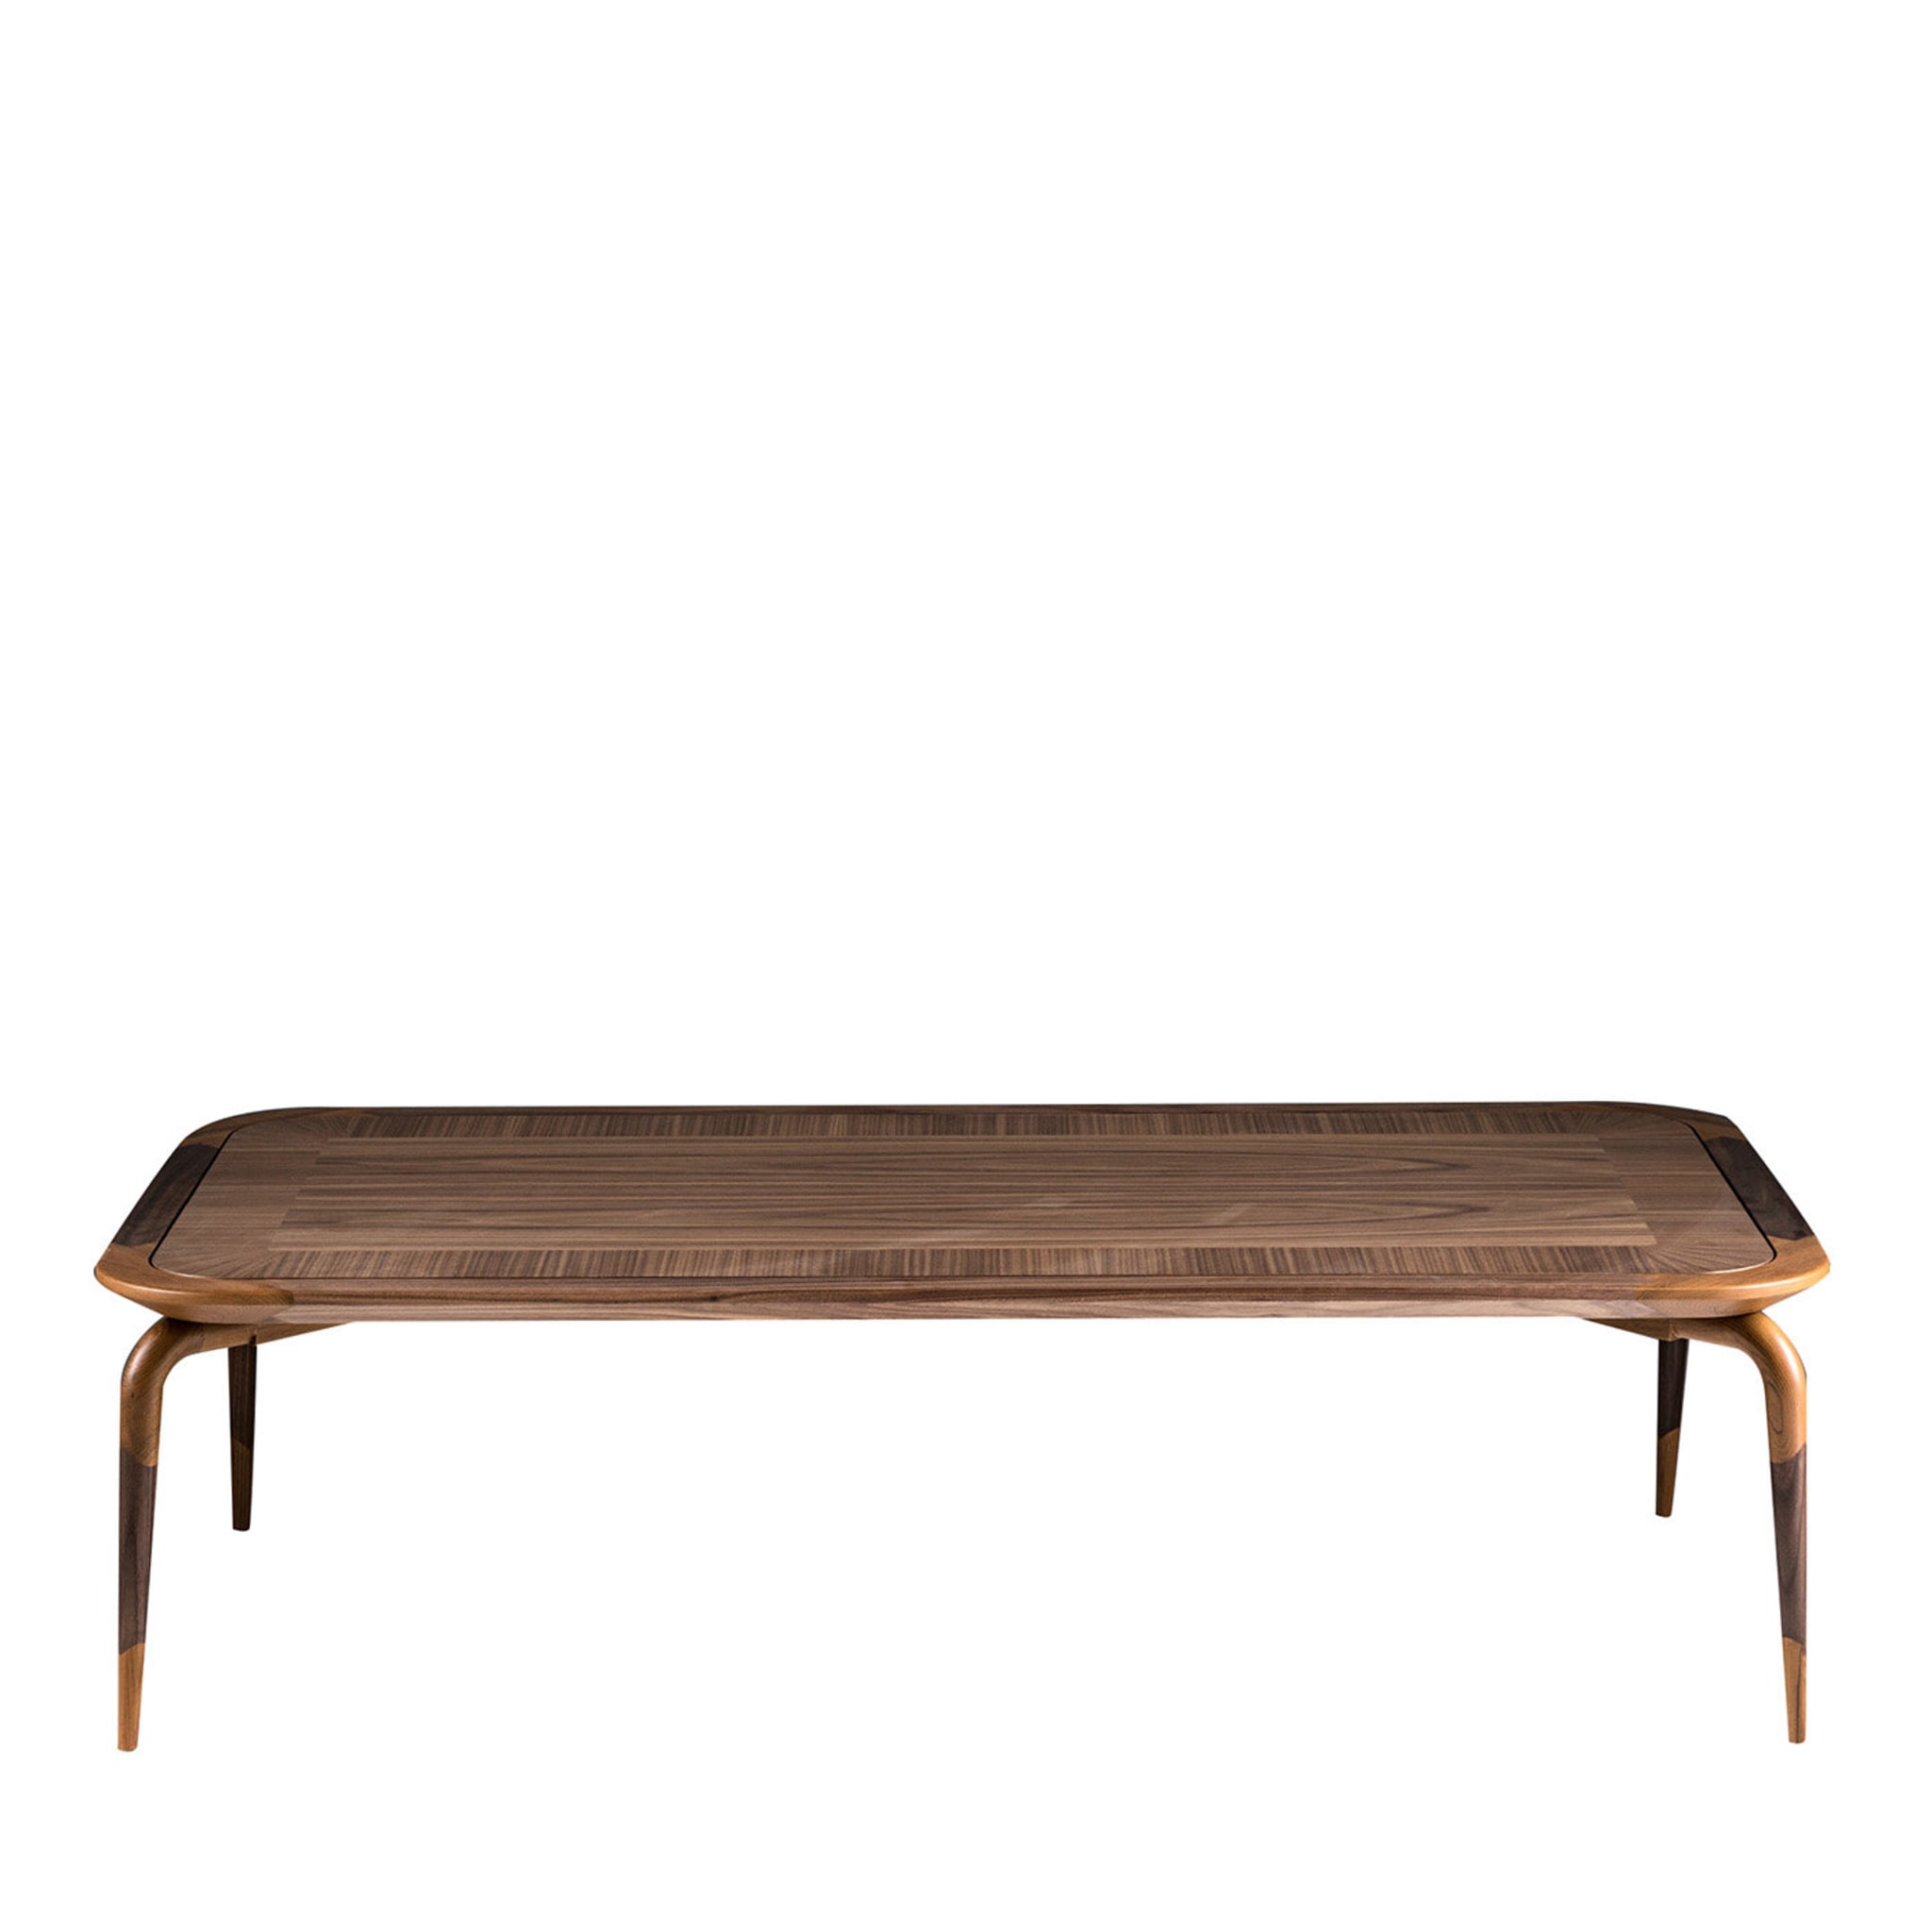 Rosetta Coffee Table by Luciano Colombo - Main view